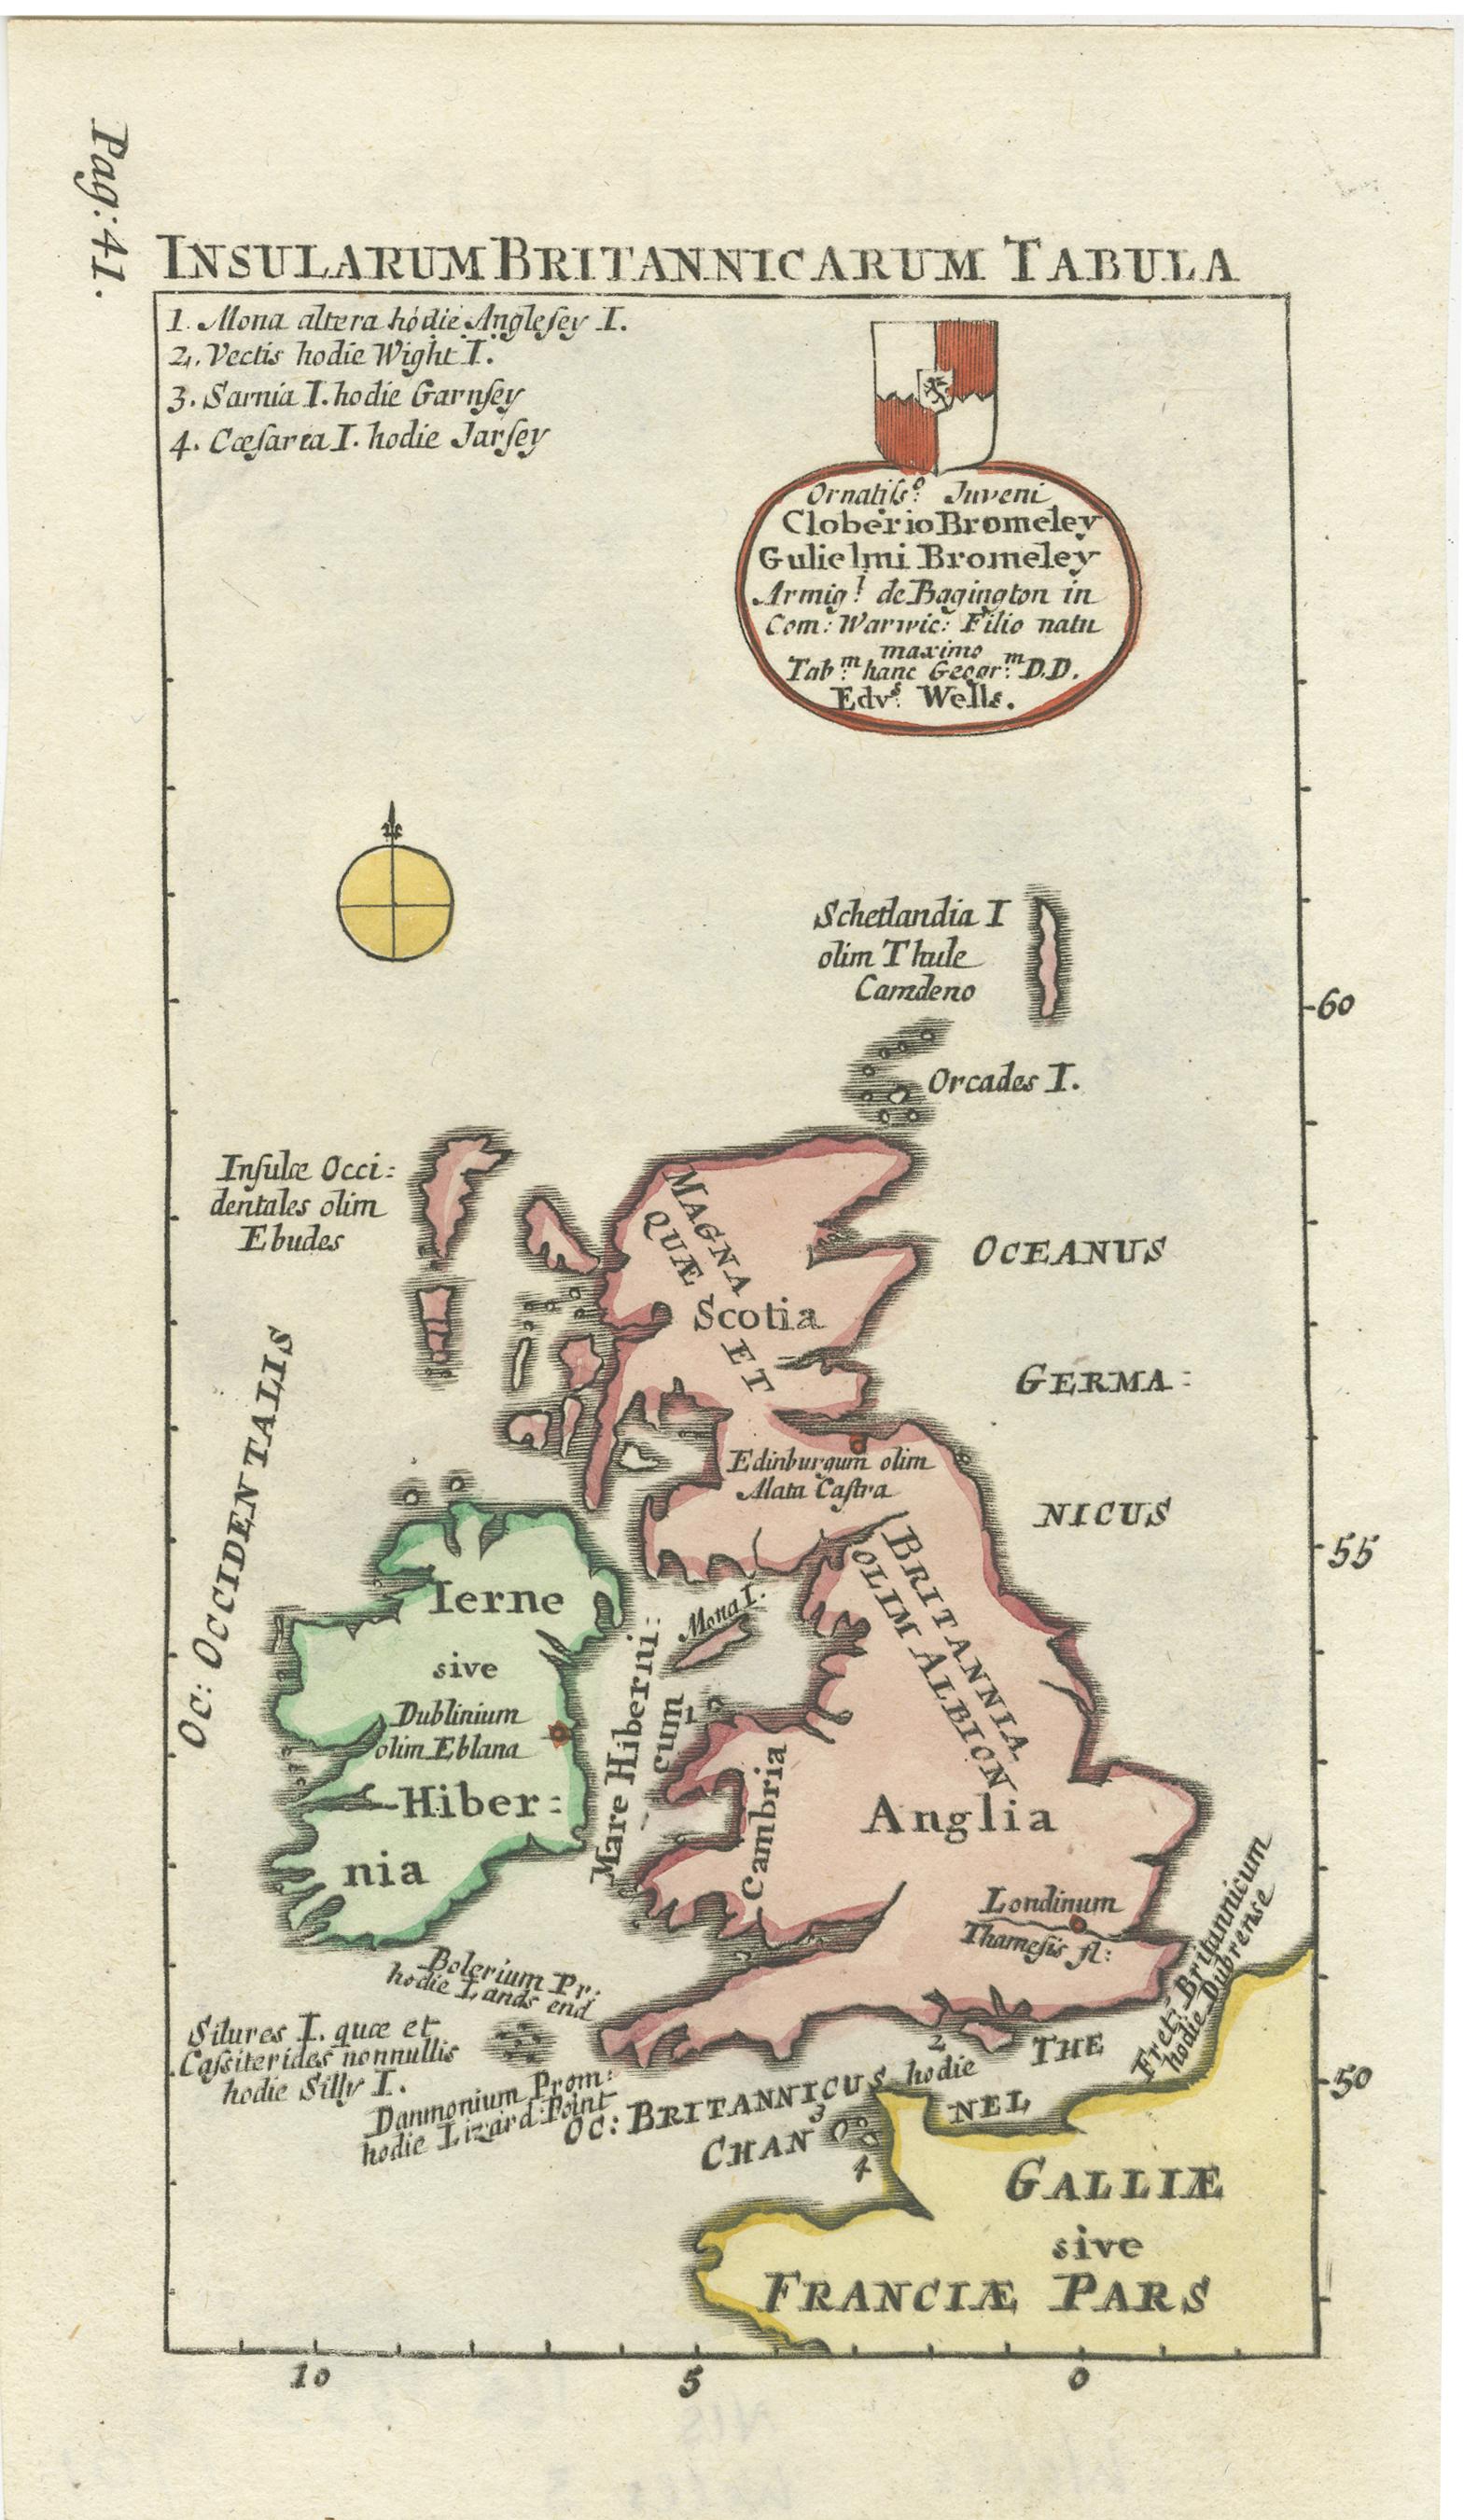 Antique map titled 'Insularum Britannicarum Tabula'. Interesting small map of the British Isles by Wells. This map originates from 'Oikumenes Periegesis, sive, Dionysii Geographia emendata & locupletata' by Edward Wells, published by A. & J.